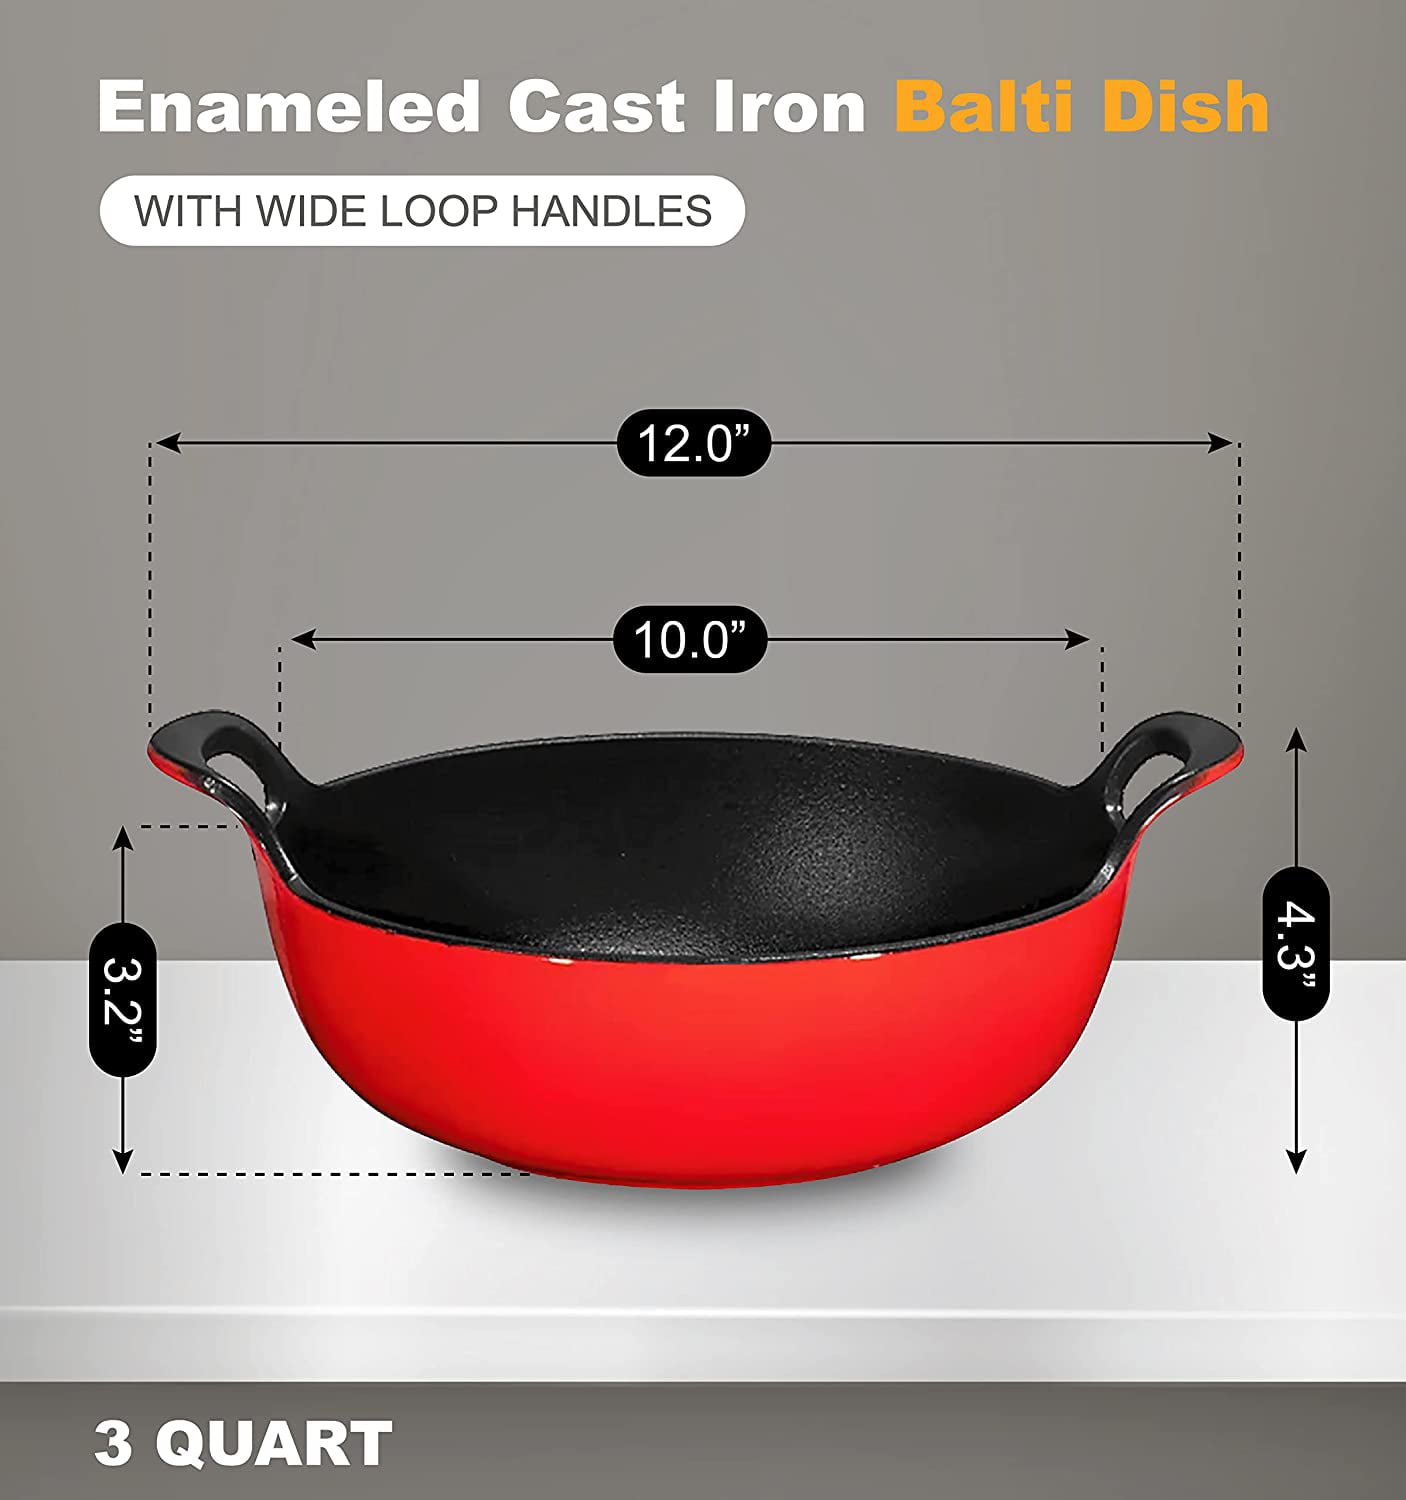 3 qt. Enameled Cast Iron Balti Dish with Wide Loop Handles Fire Red, Small